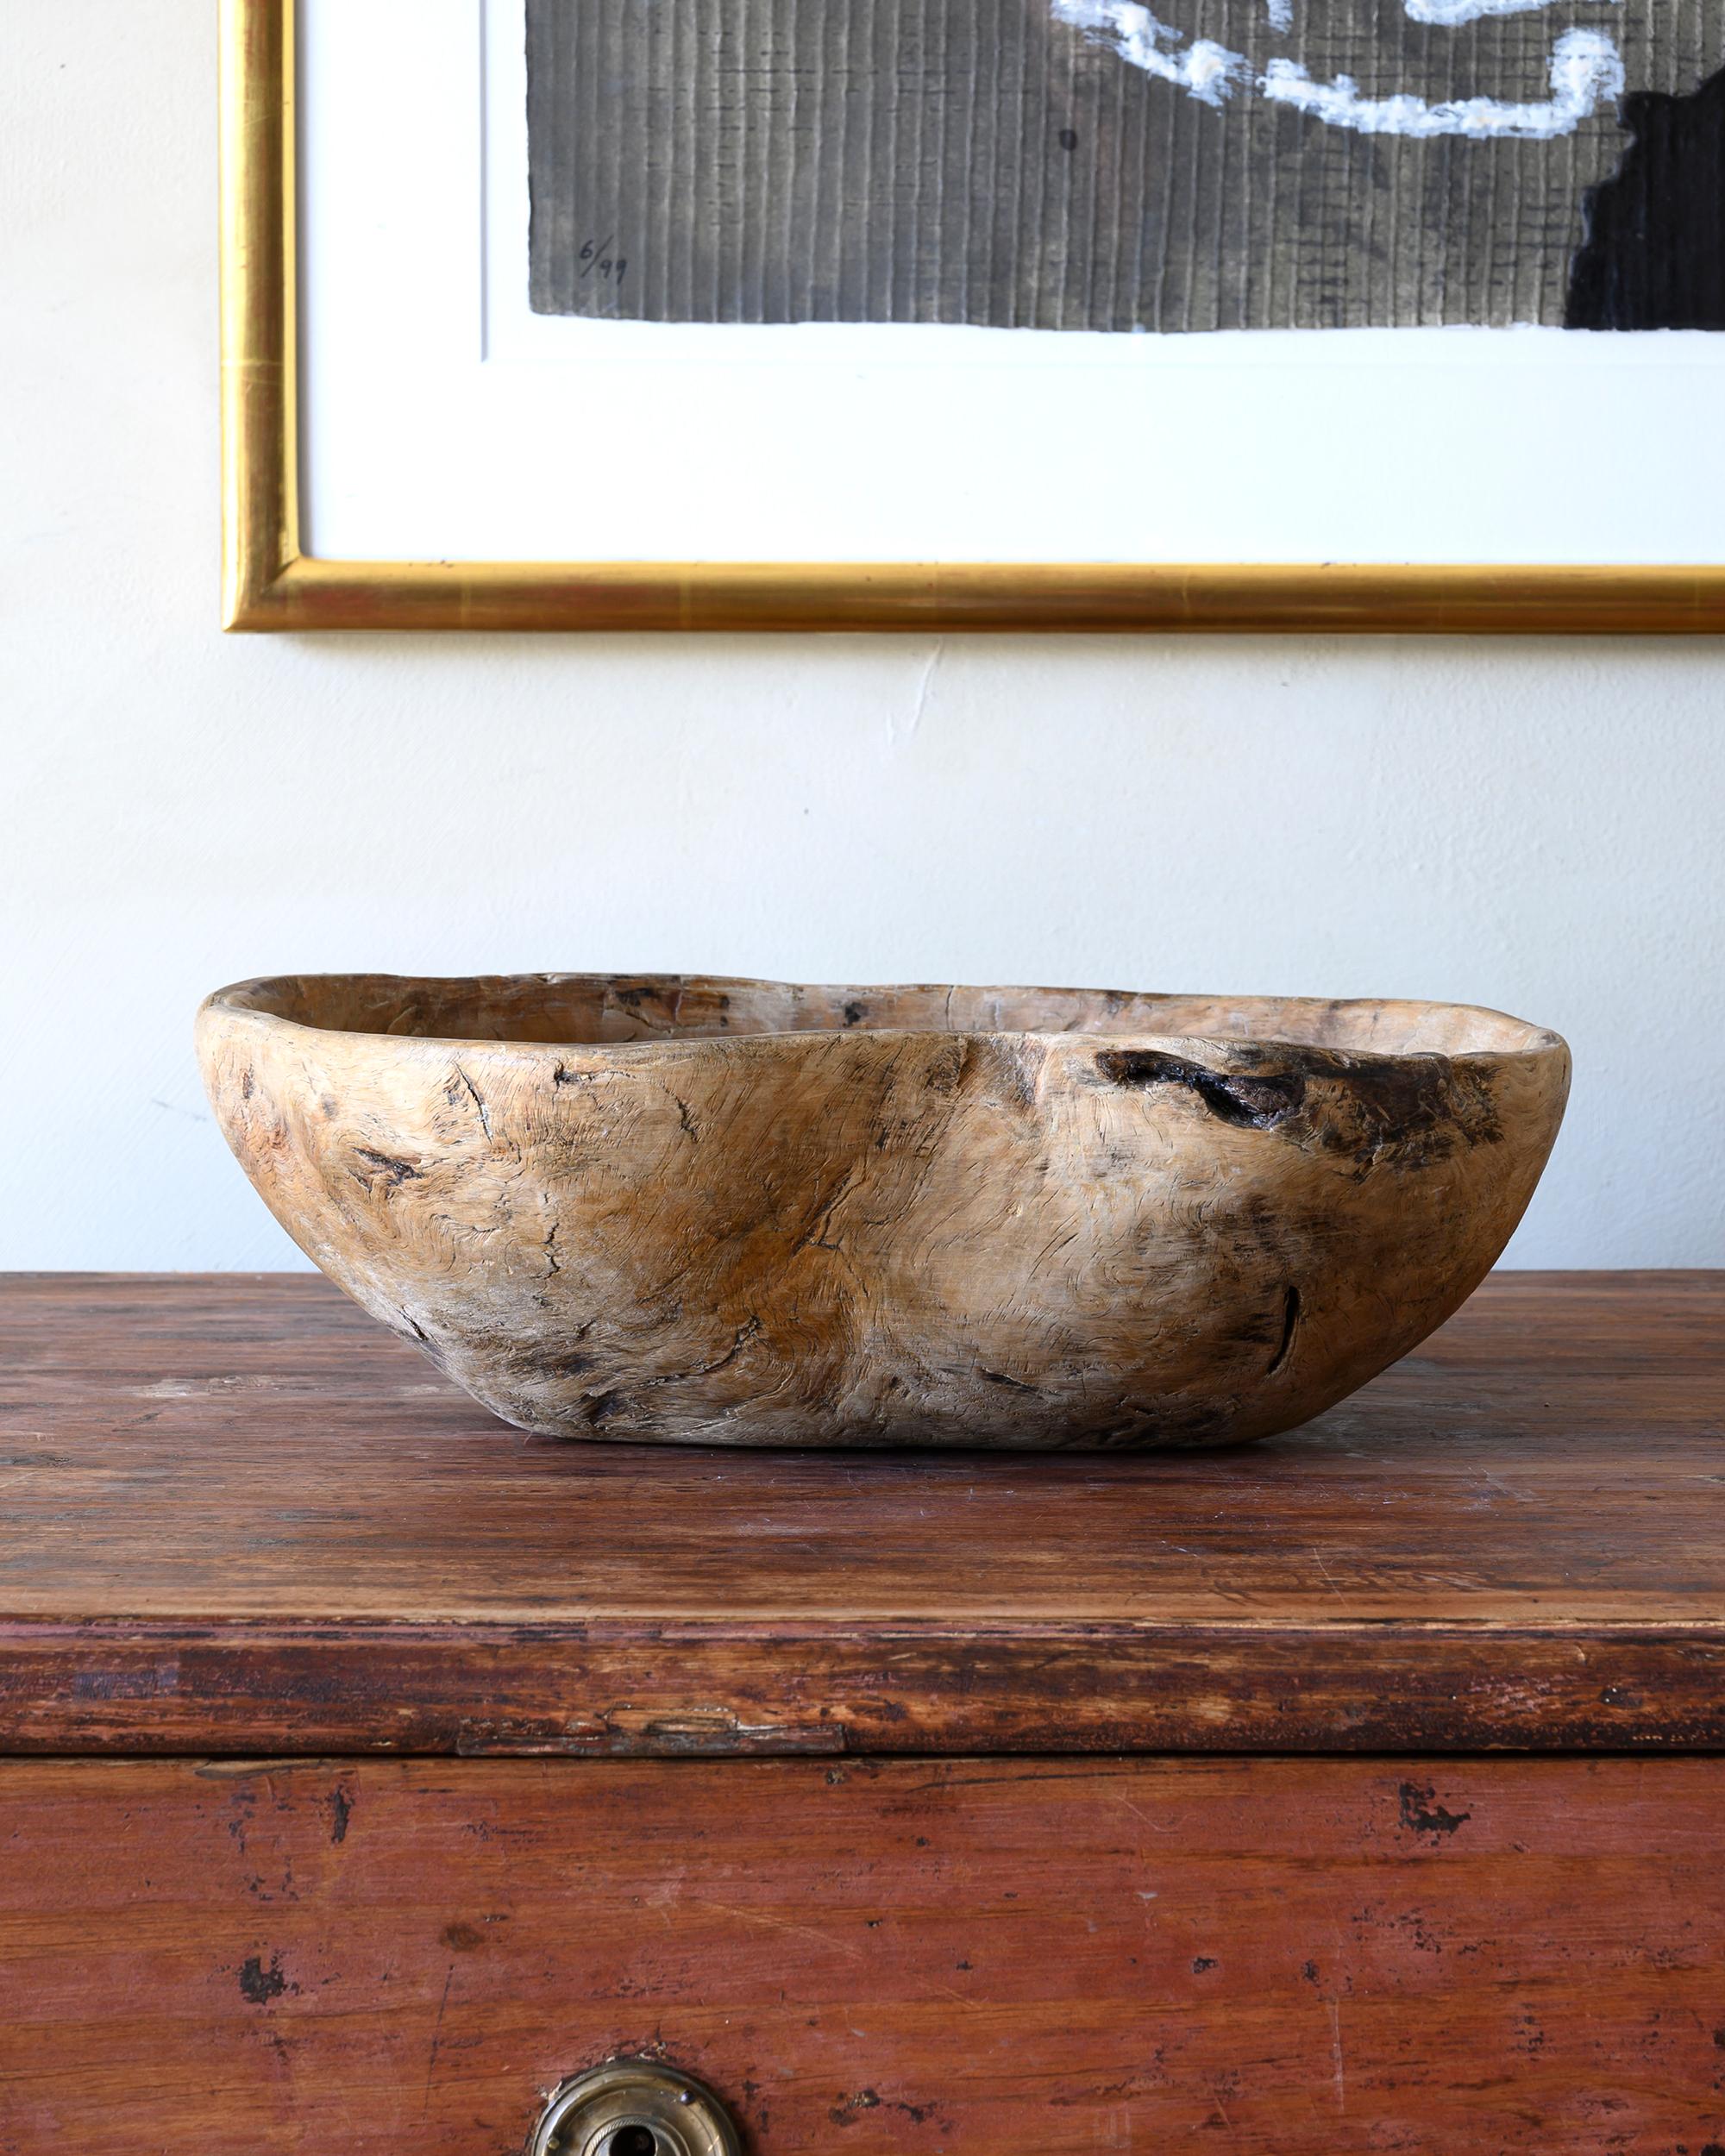 Nice organically shaped early 19th century Swedish folk art root wood bowl, signed HE A. Ca 1820 Sweden.